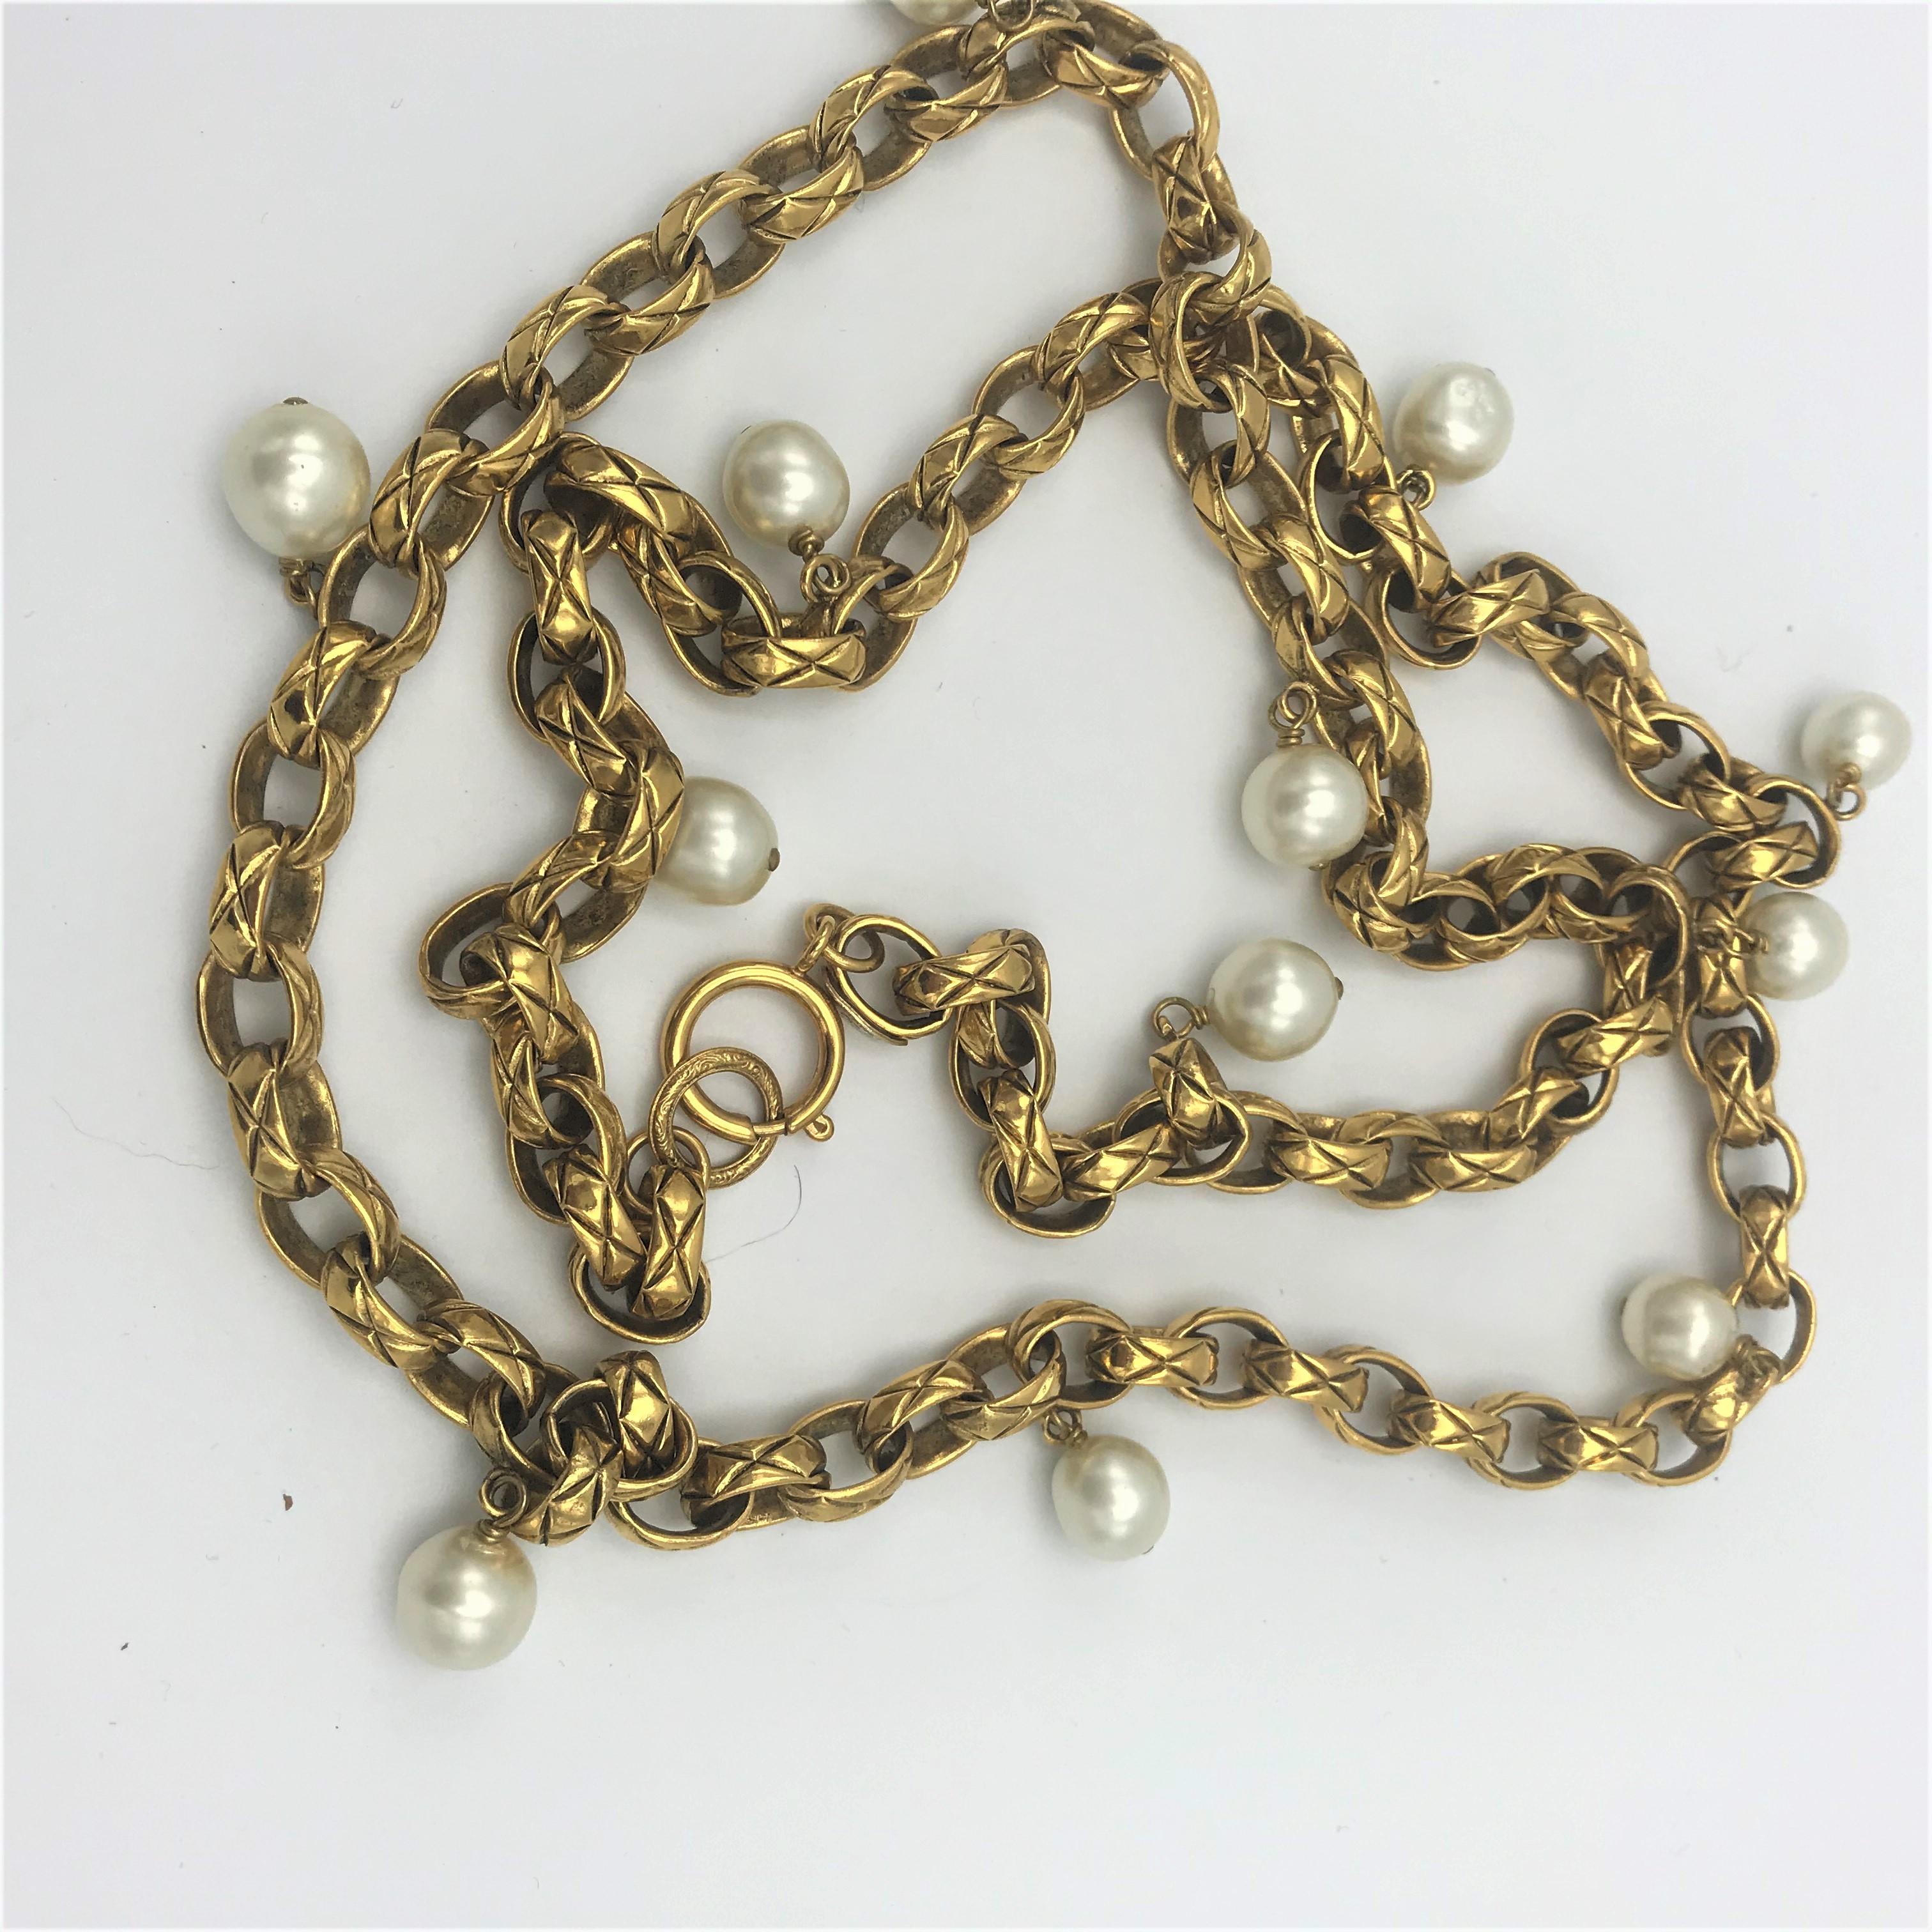 Timeless, typical CHANEL Necklace designed by Victoire de Castellane, signed 2CC3 = 1985, her 1st collection for CHANEL. Length of the necklace  150 cm with the typical watch clasp closer. There are 12 imitation pearls hanging on the quilted